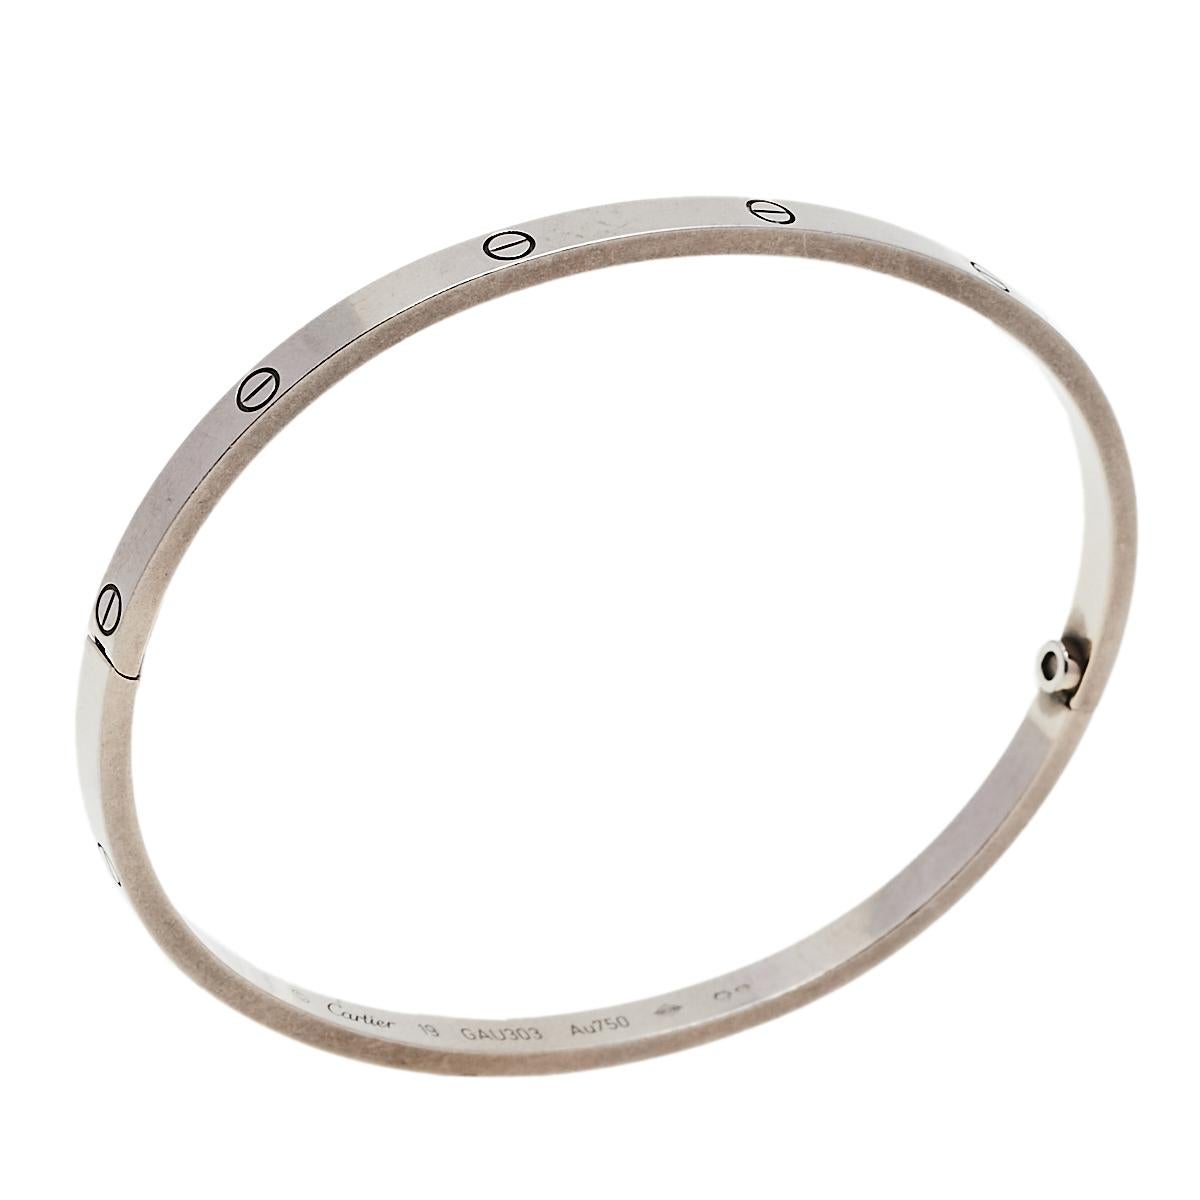 We fell in love with this Cartier Love bracelet at first glance. Look at its gorgeous yet subtle accents and picture how it will beautifully sit on your wrist and charm your peers. The creation is crafted from 18k white gold in a cuff style and